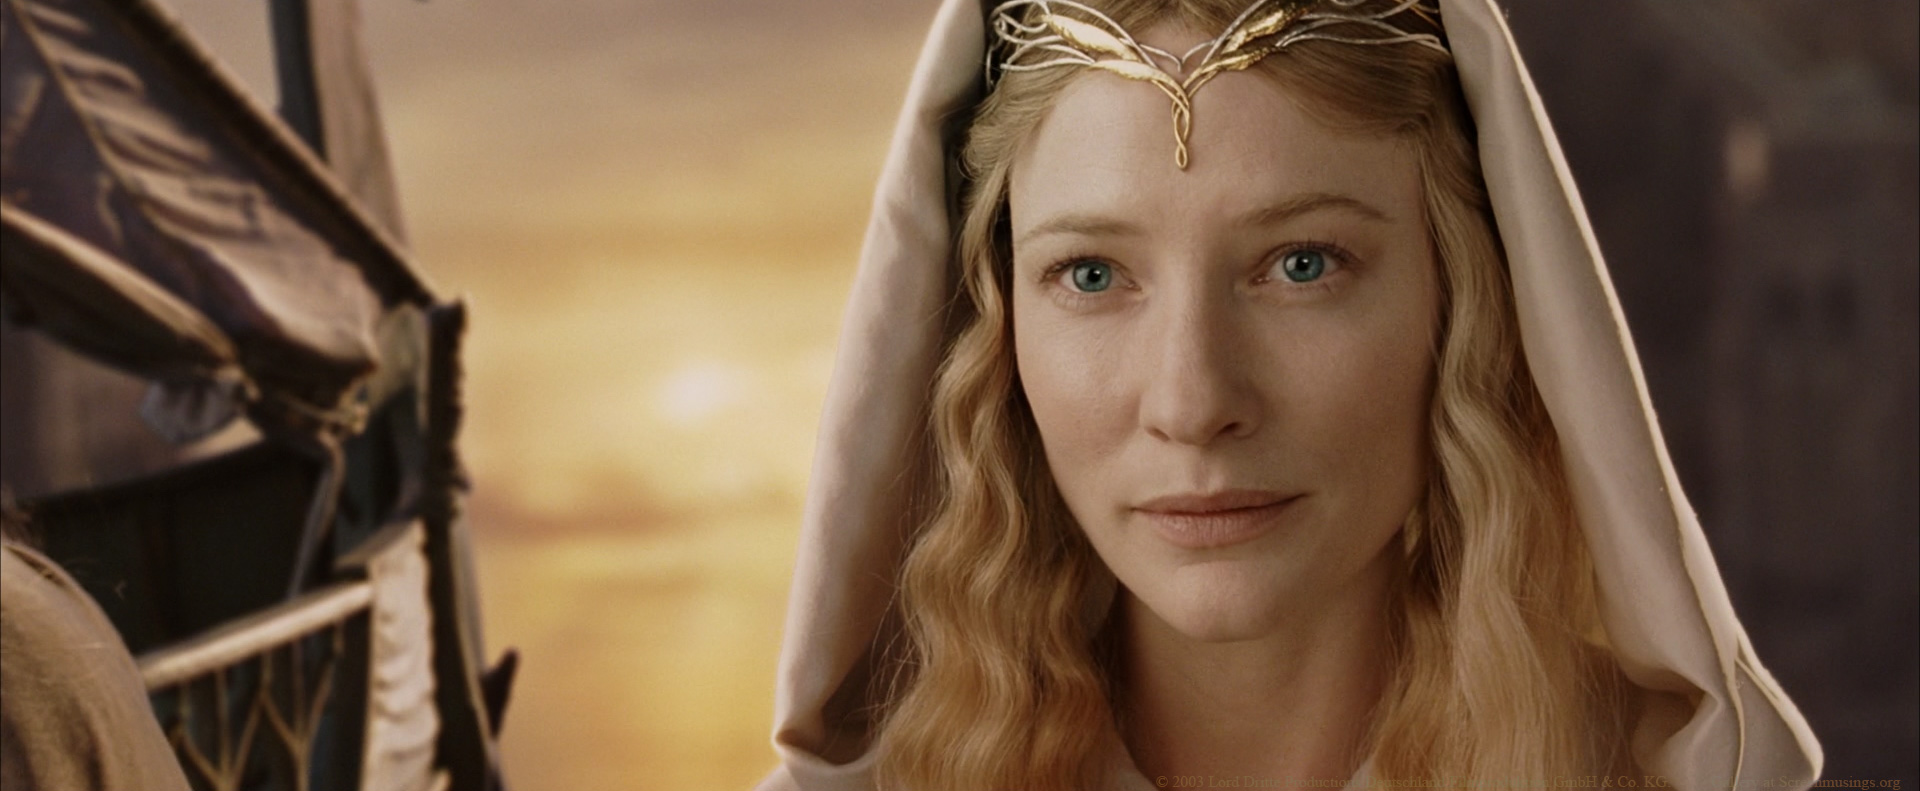 Cate Blanchett, Galadriel in The Lord of the Rings: The Return of the King